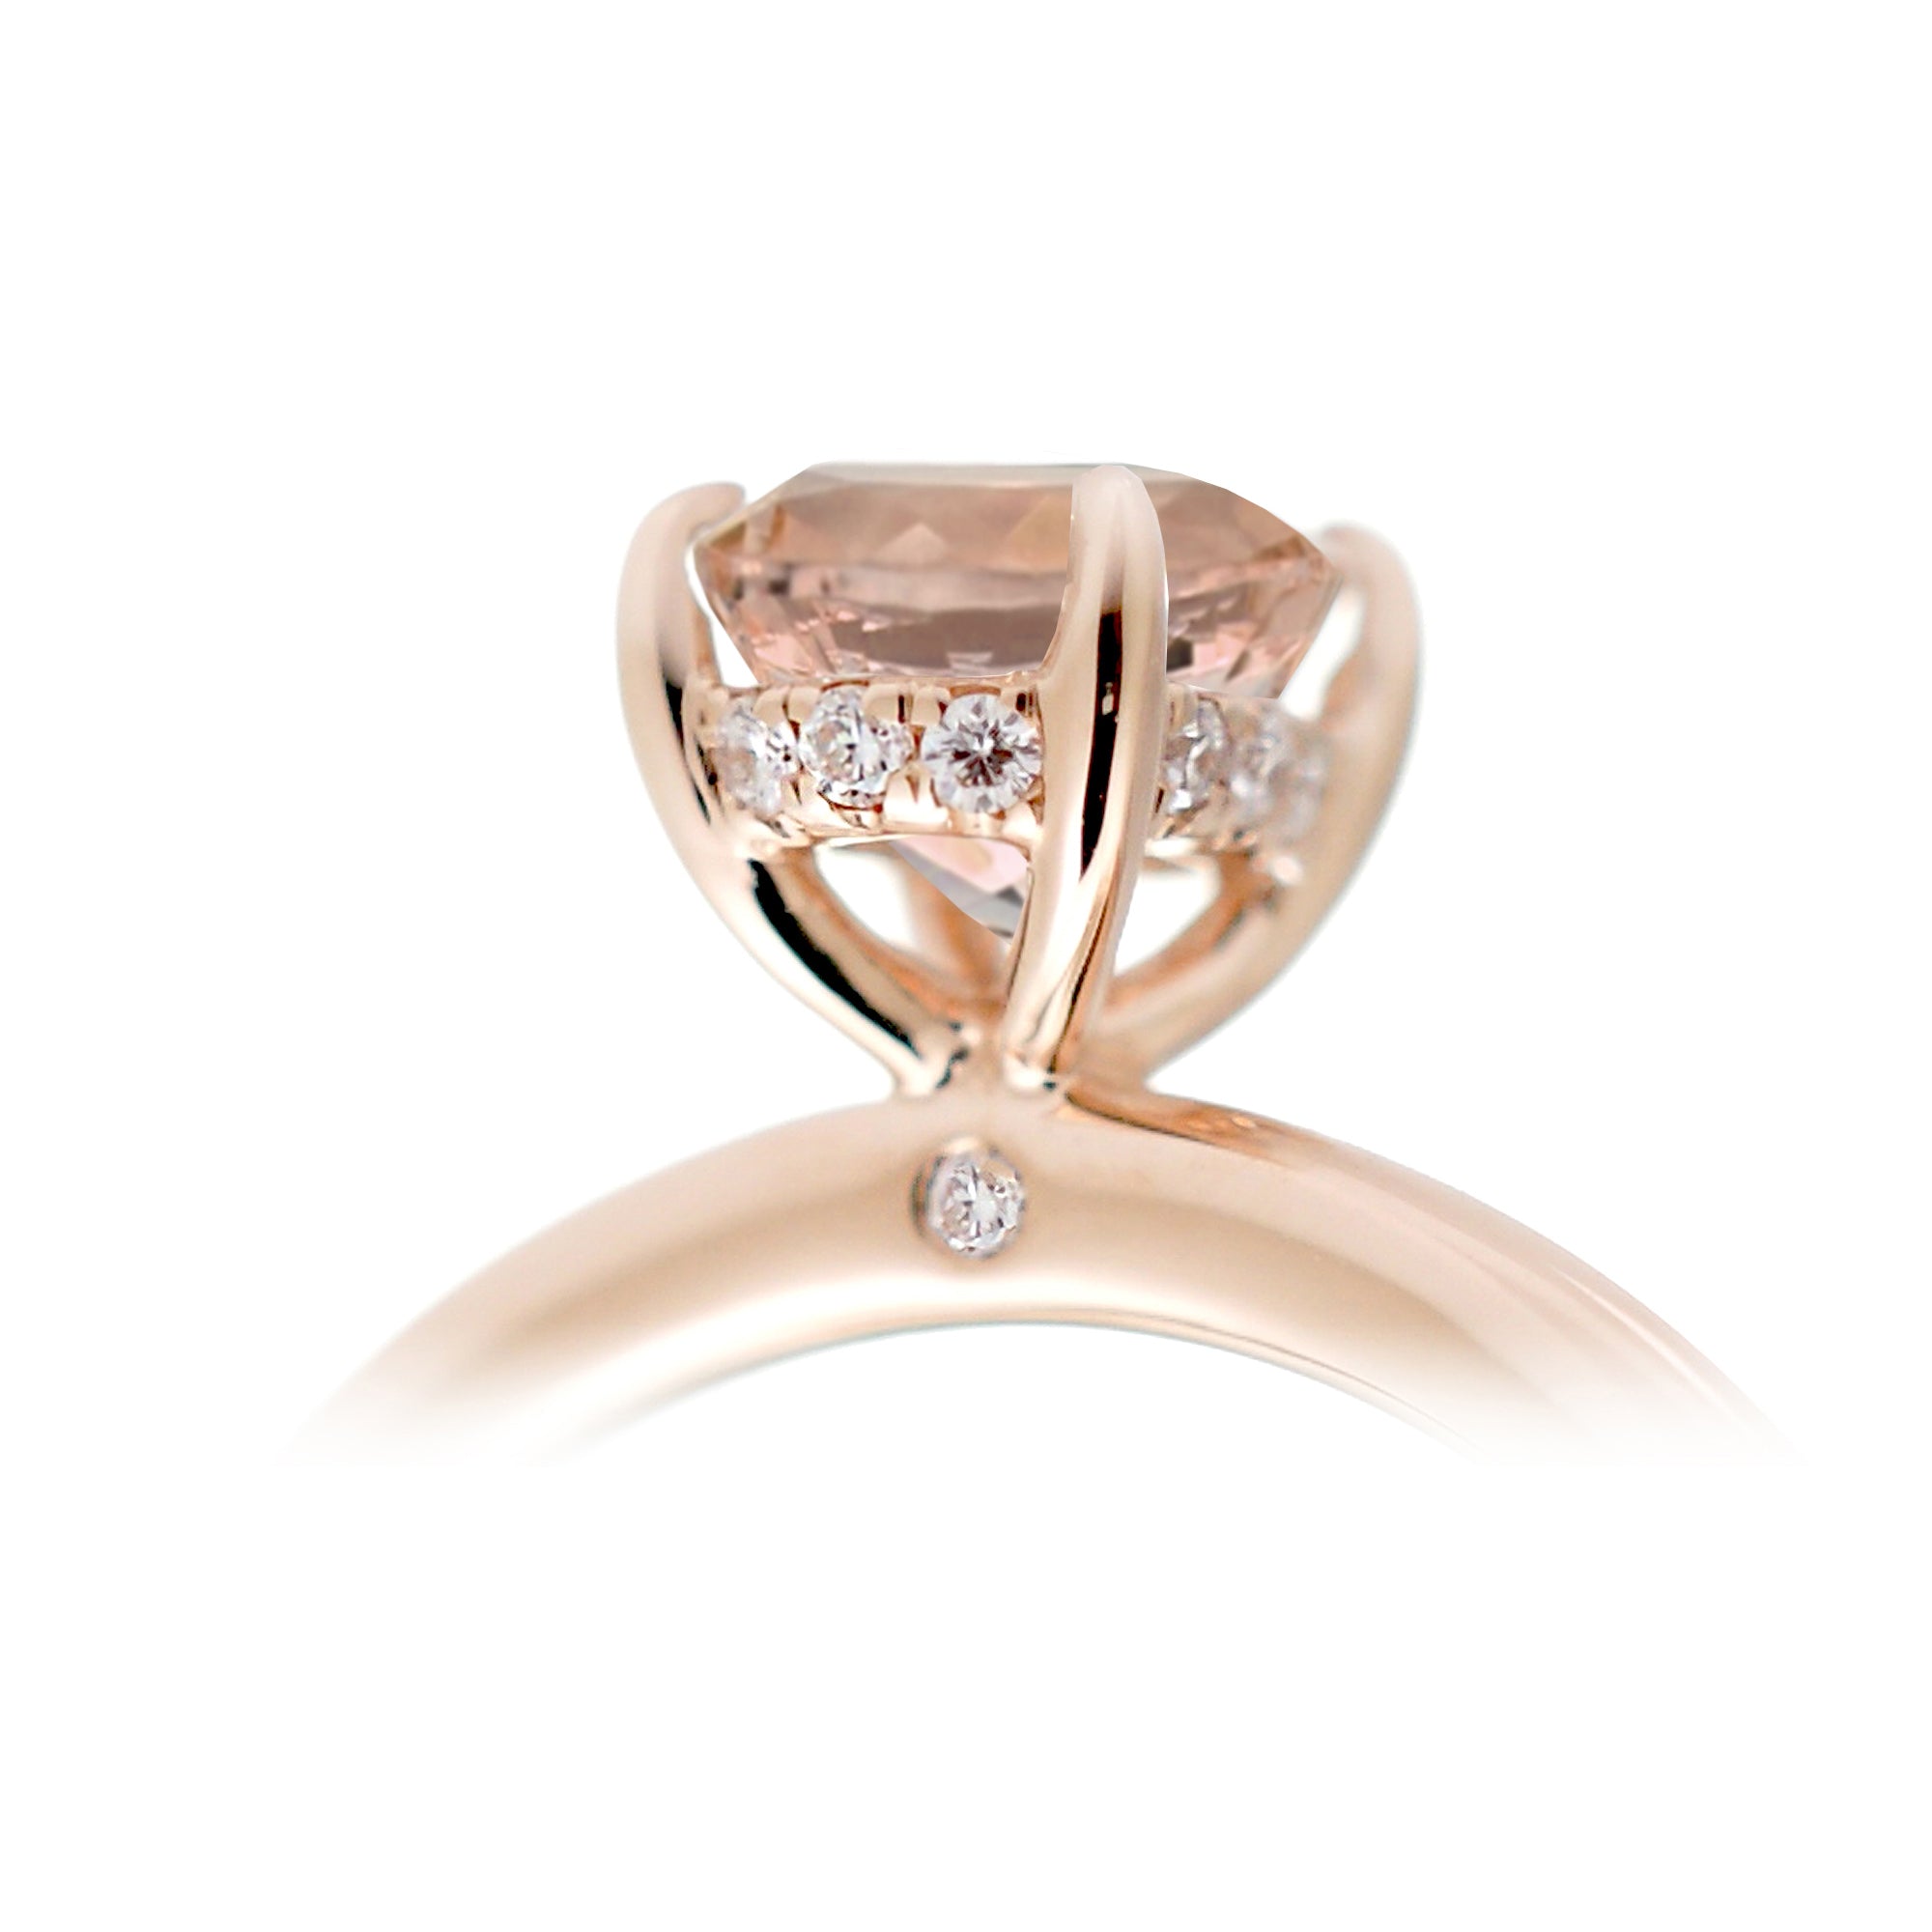 Round morganite ring with hidden halo in rose gold